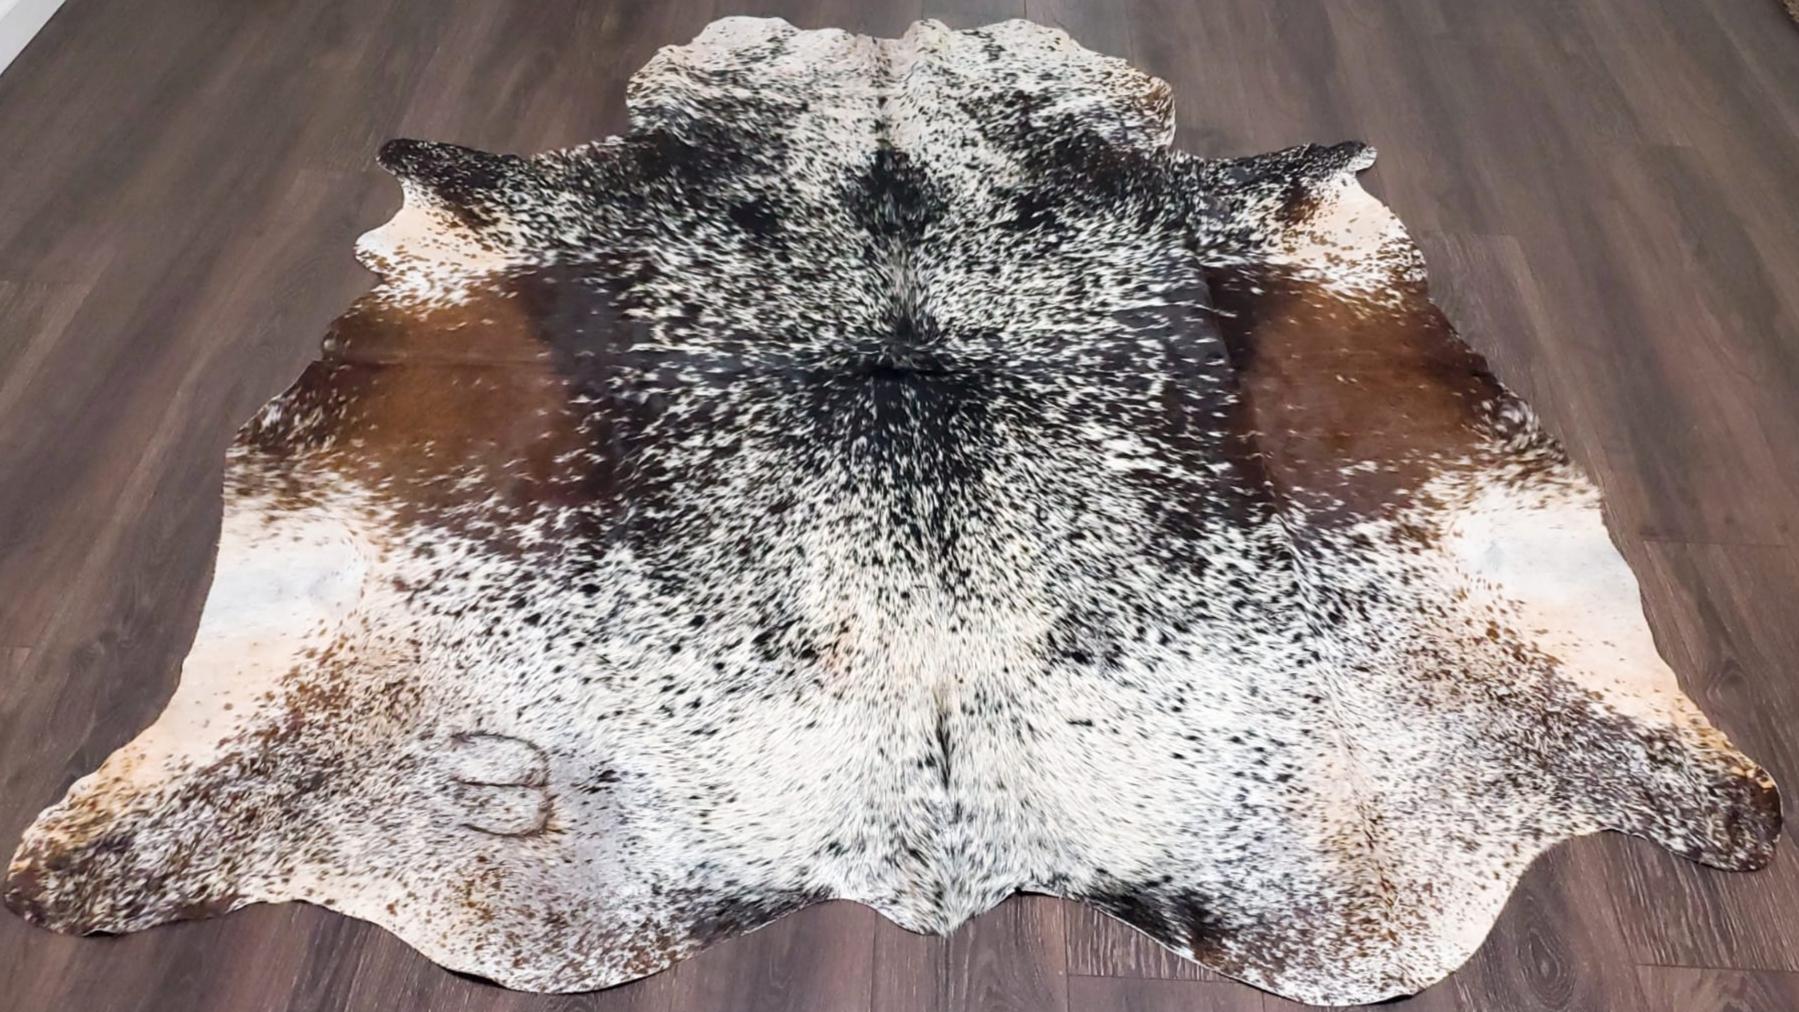 Premium Quality Real Tricolor Cowhide Rug Leather/ Cow Skin Area Rug Hair on Leather Hide 6.5 ft X 6 ft - 36 x 36 sq.ft Approx. (Tricolor 20)